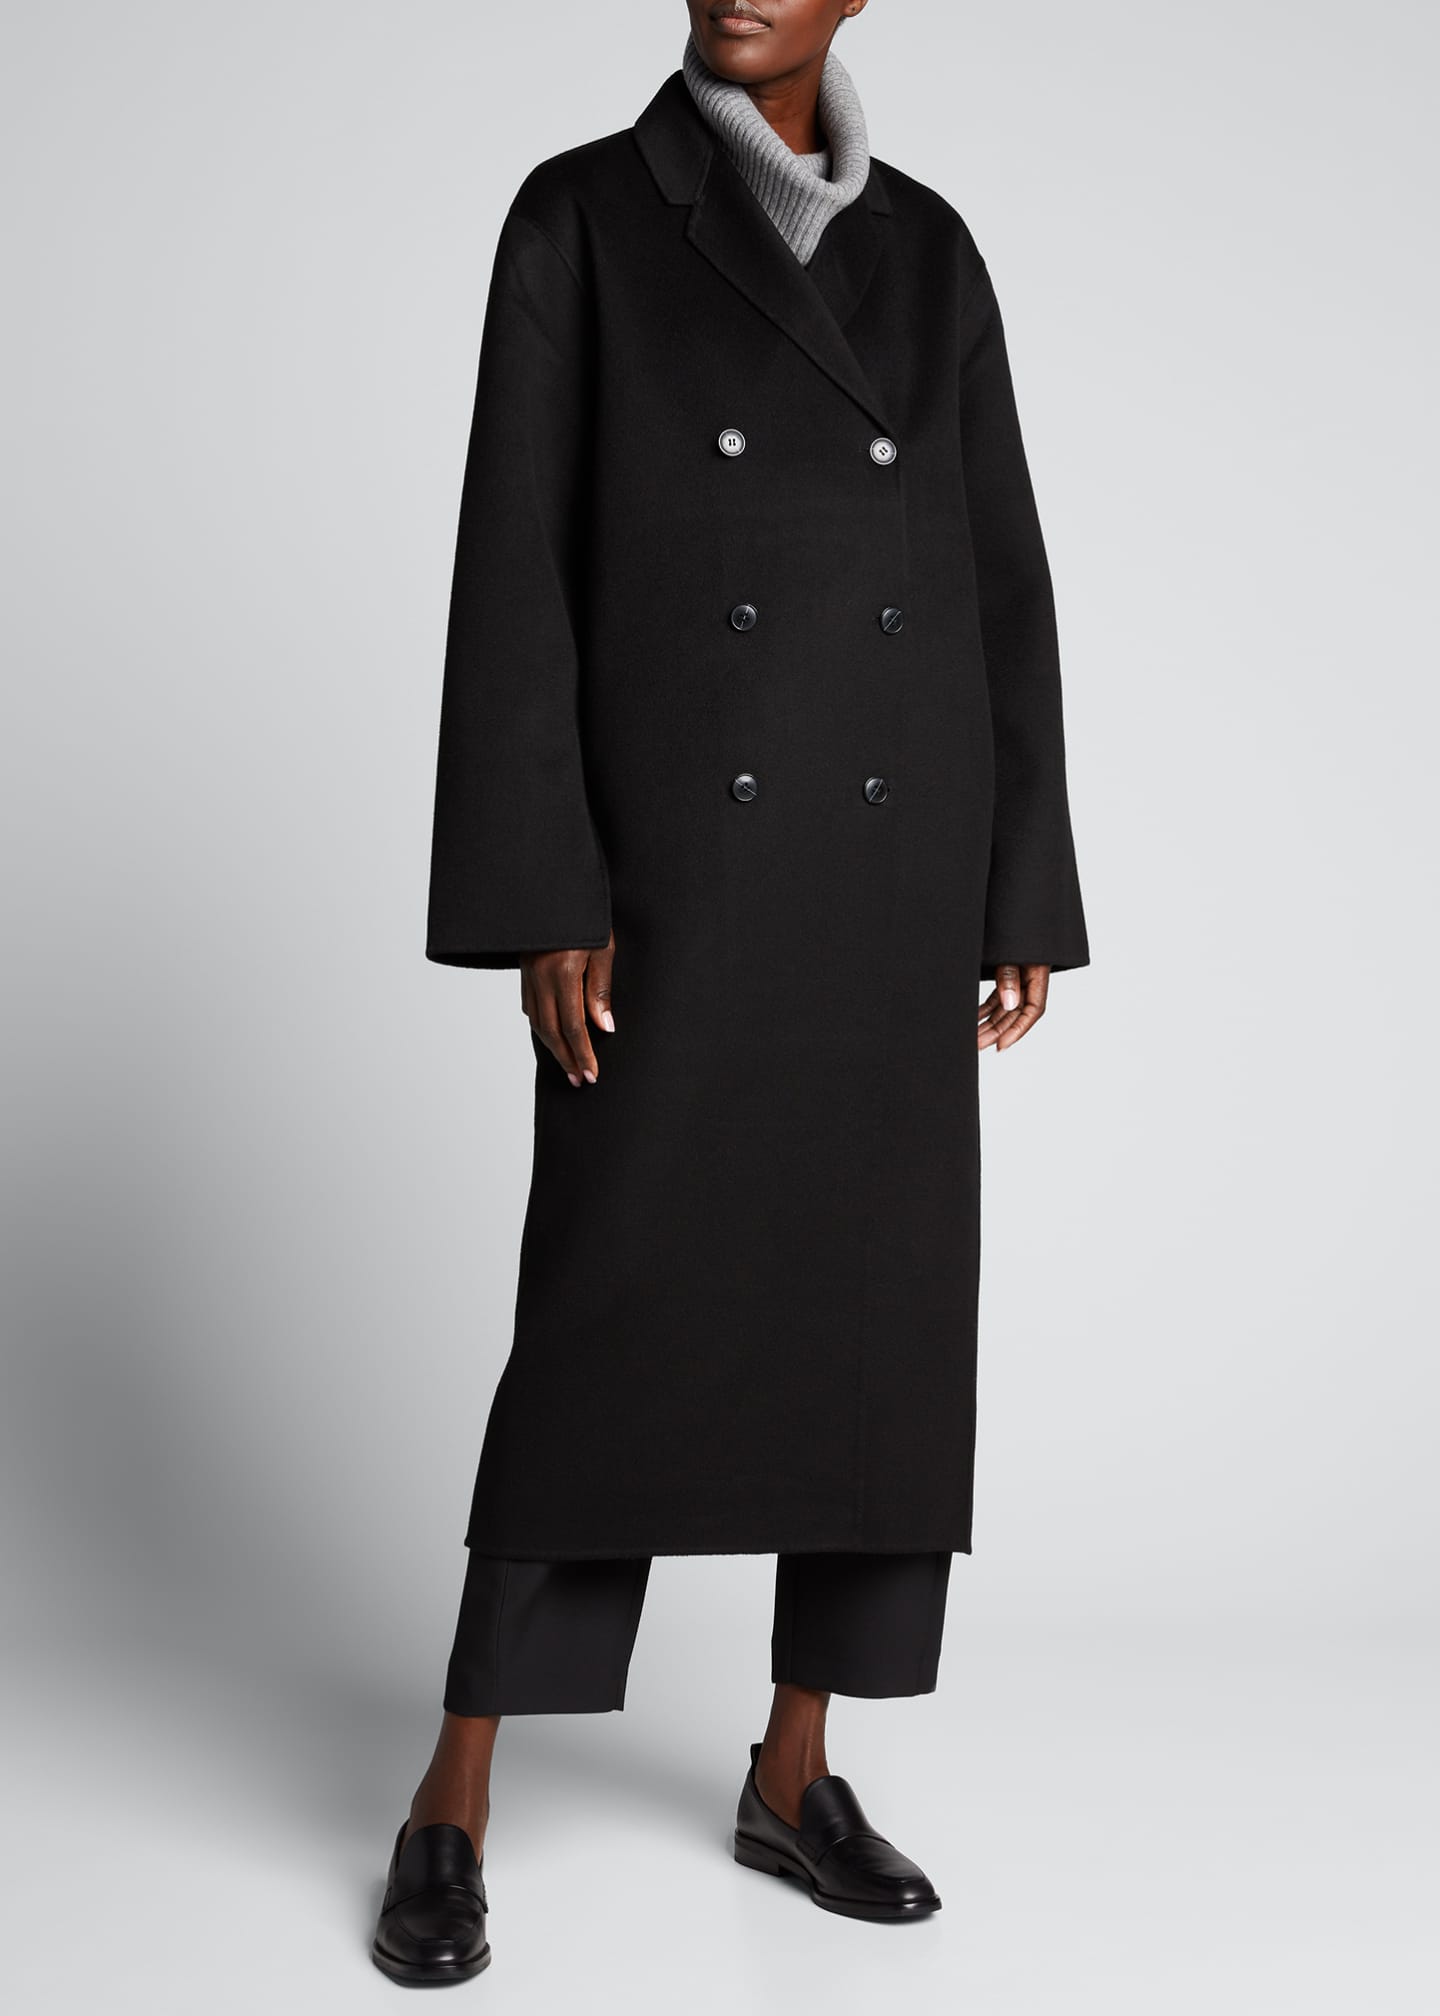 Toteme Picos Double-Breasted Wool Coat - Bergdorf Goodman